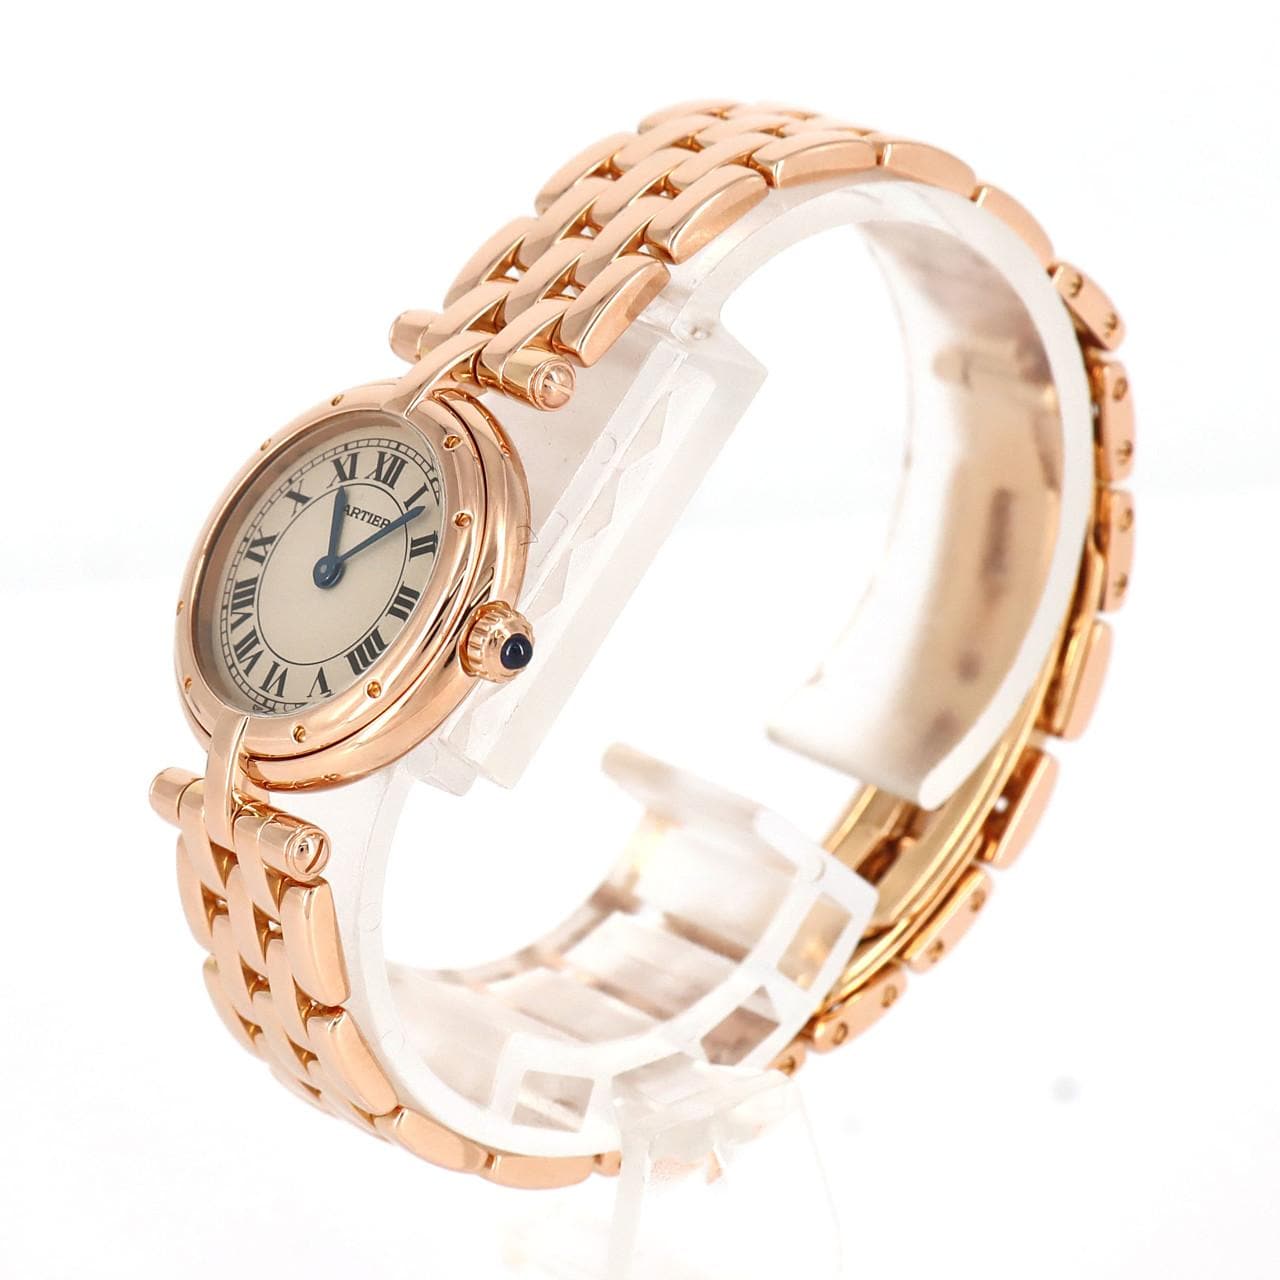 Cartier Panthere VENDOME SM PG W25009F1 PG/RG石英